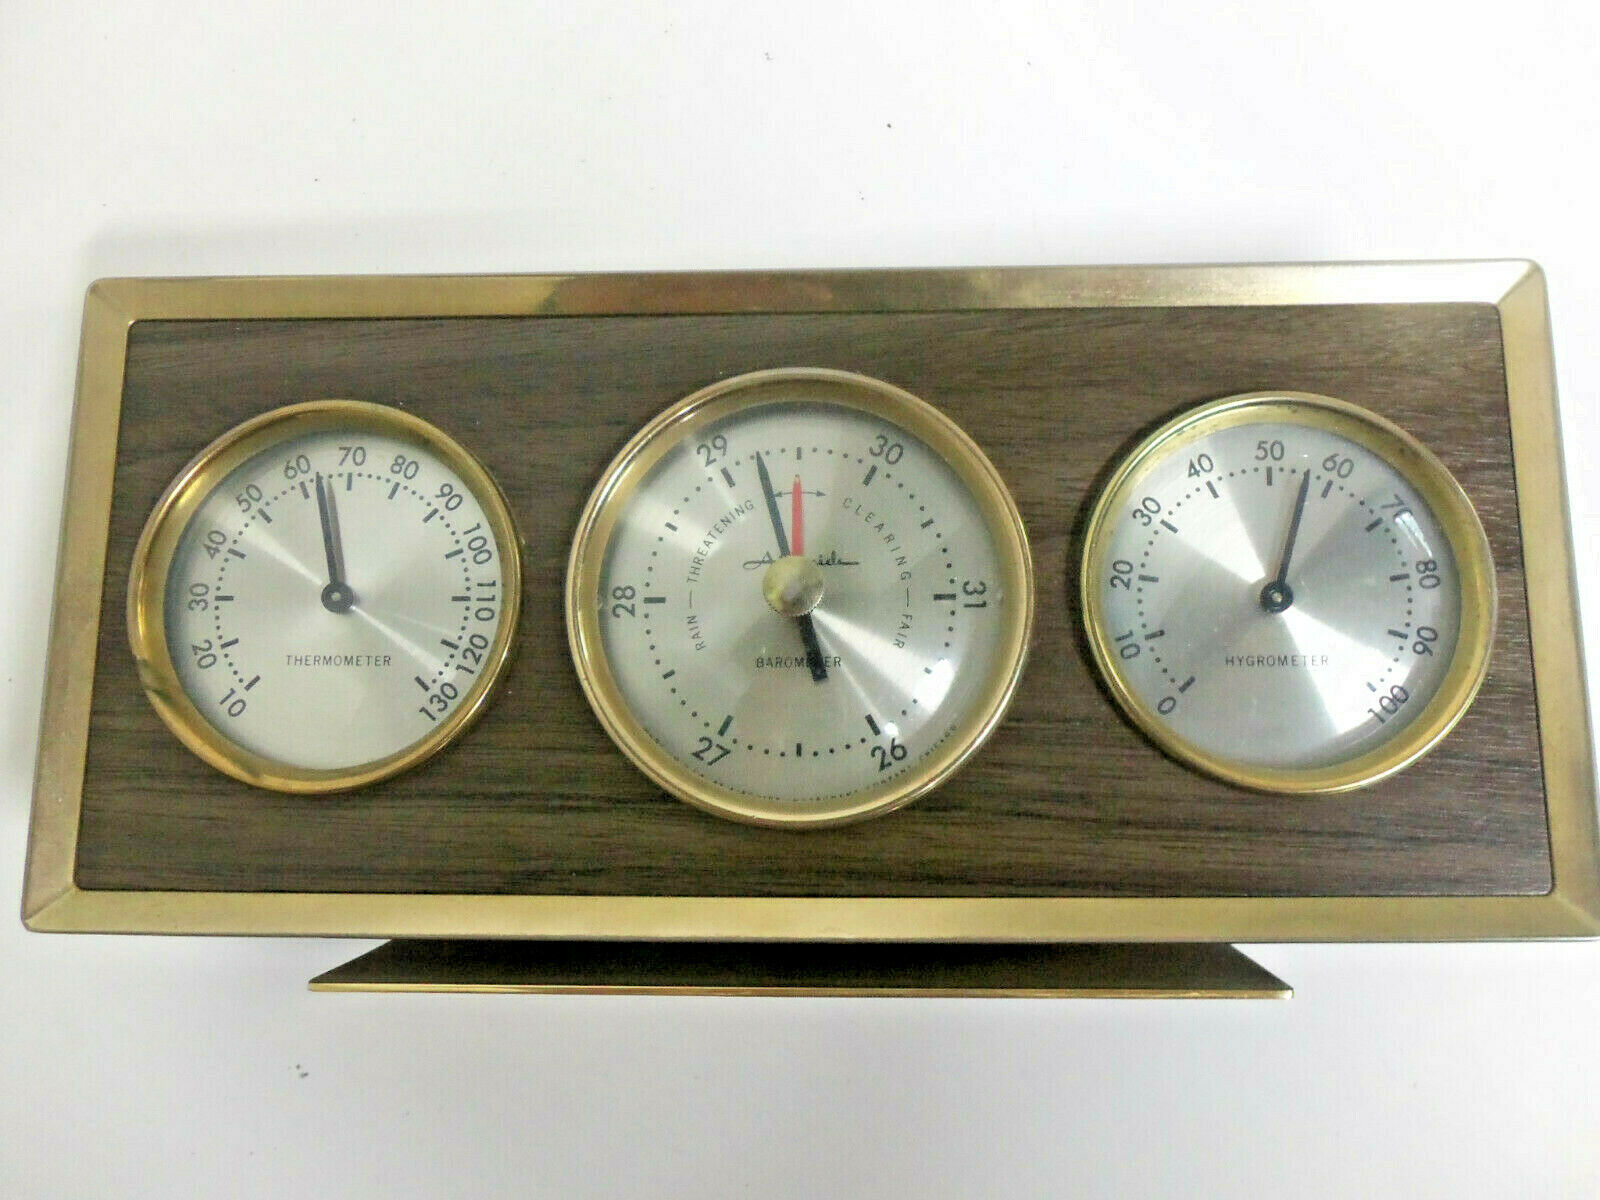 Vintage Airguide Thermometer - Barometer - Hygrometer - Made in USA